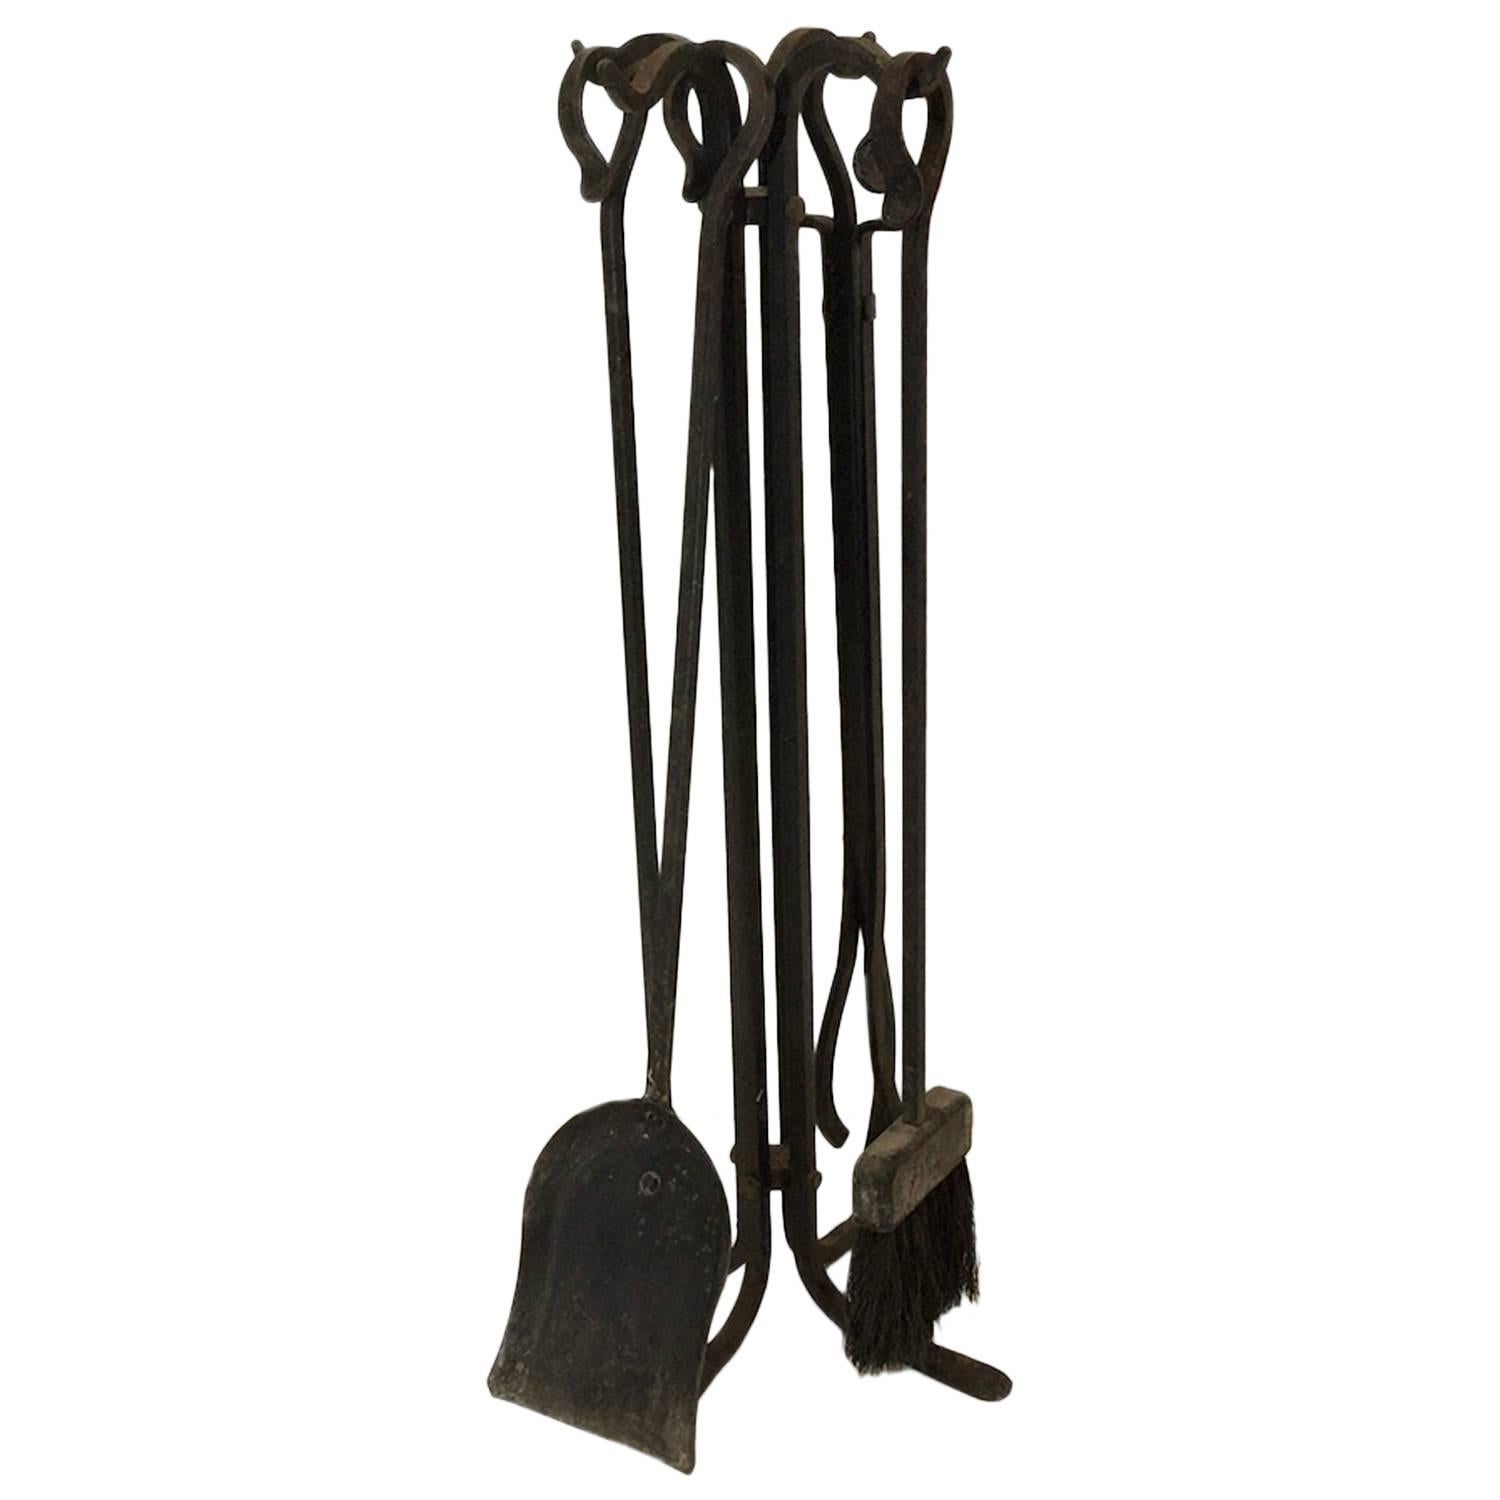 Wrought Iron Fireplace Tools